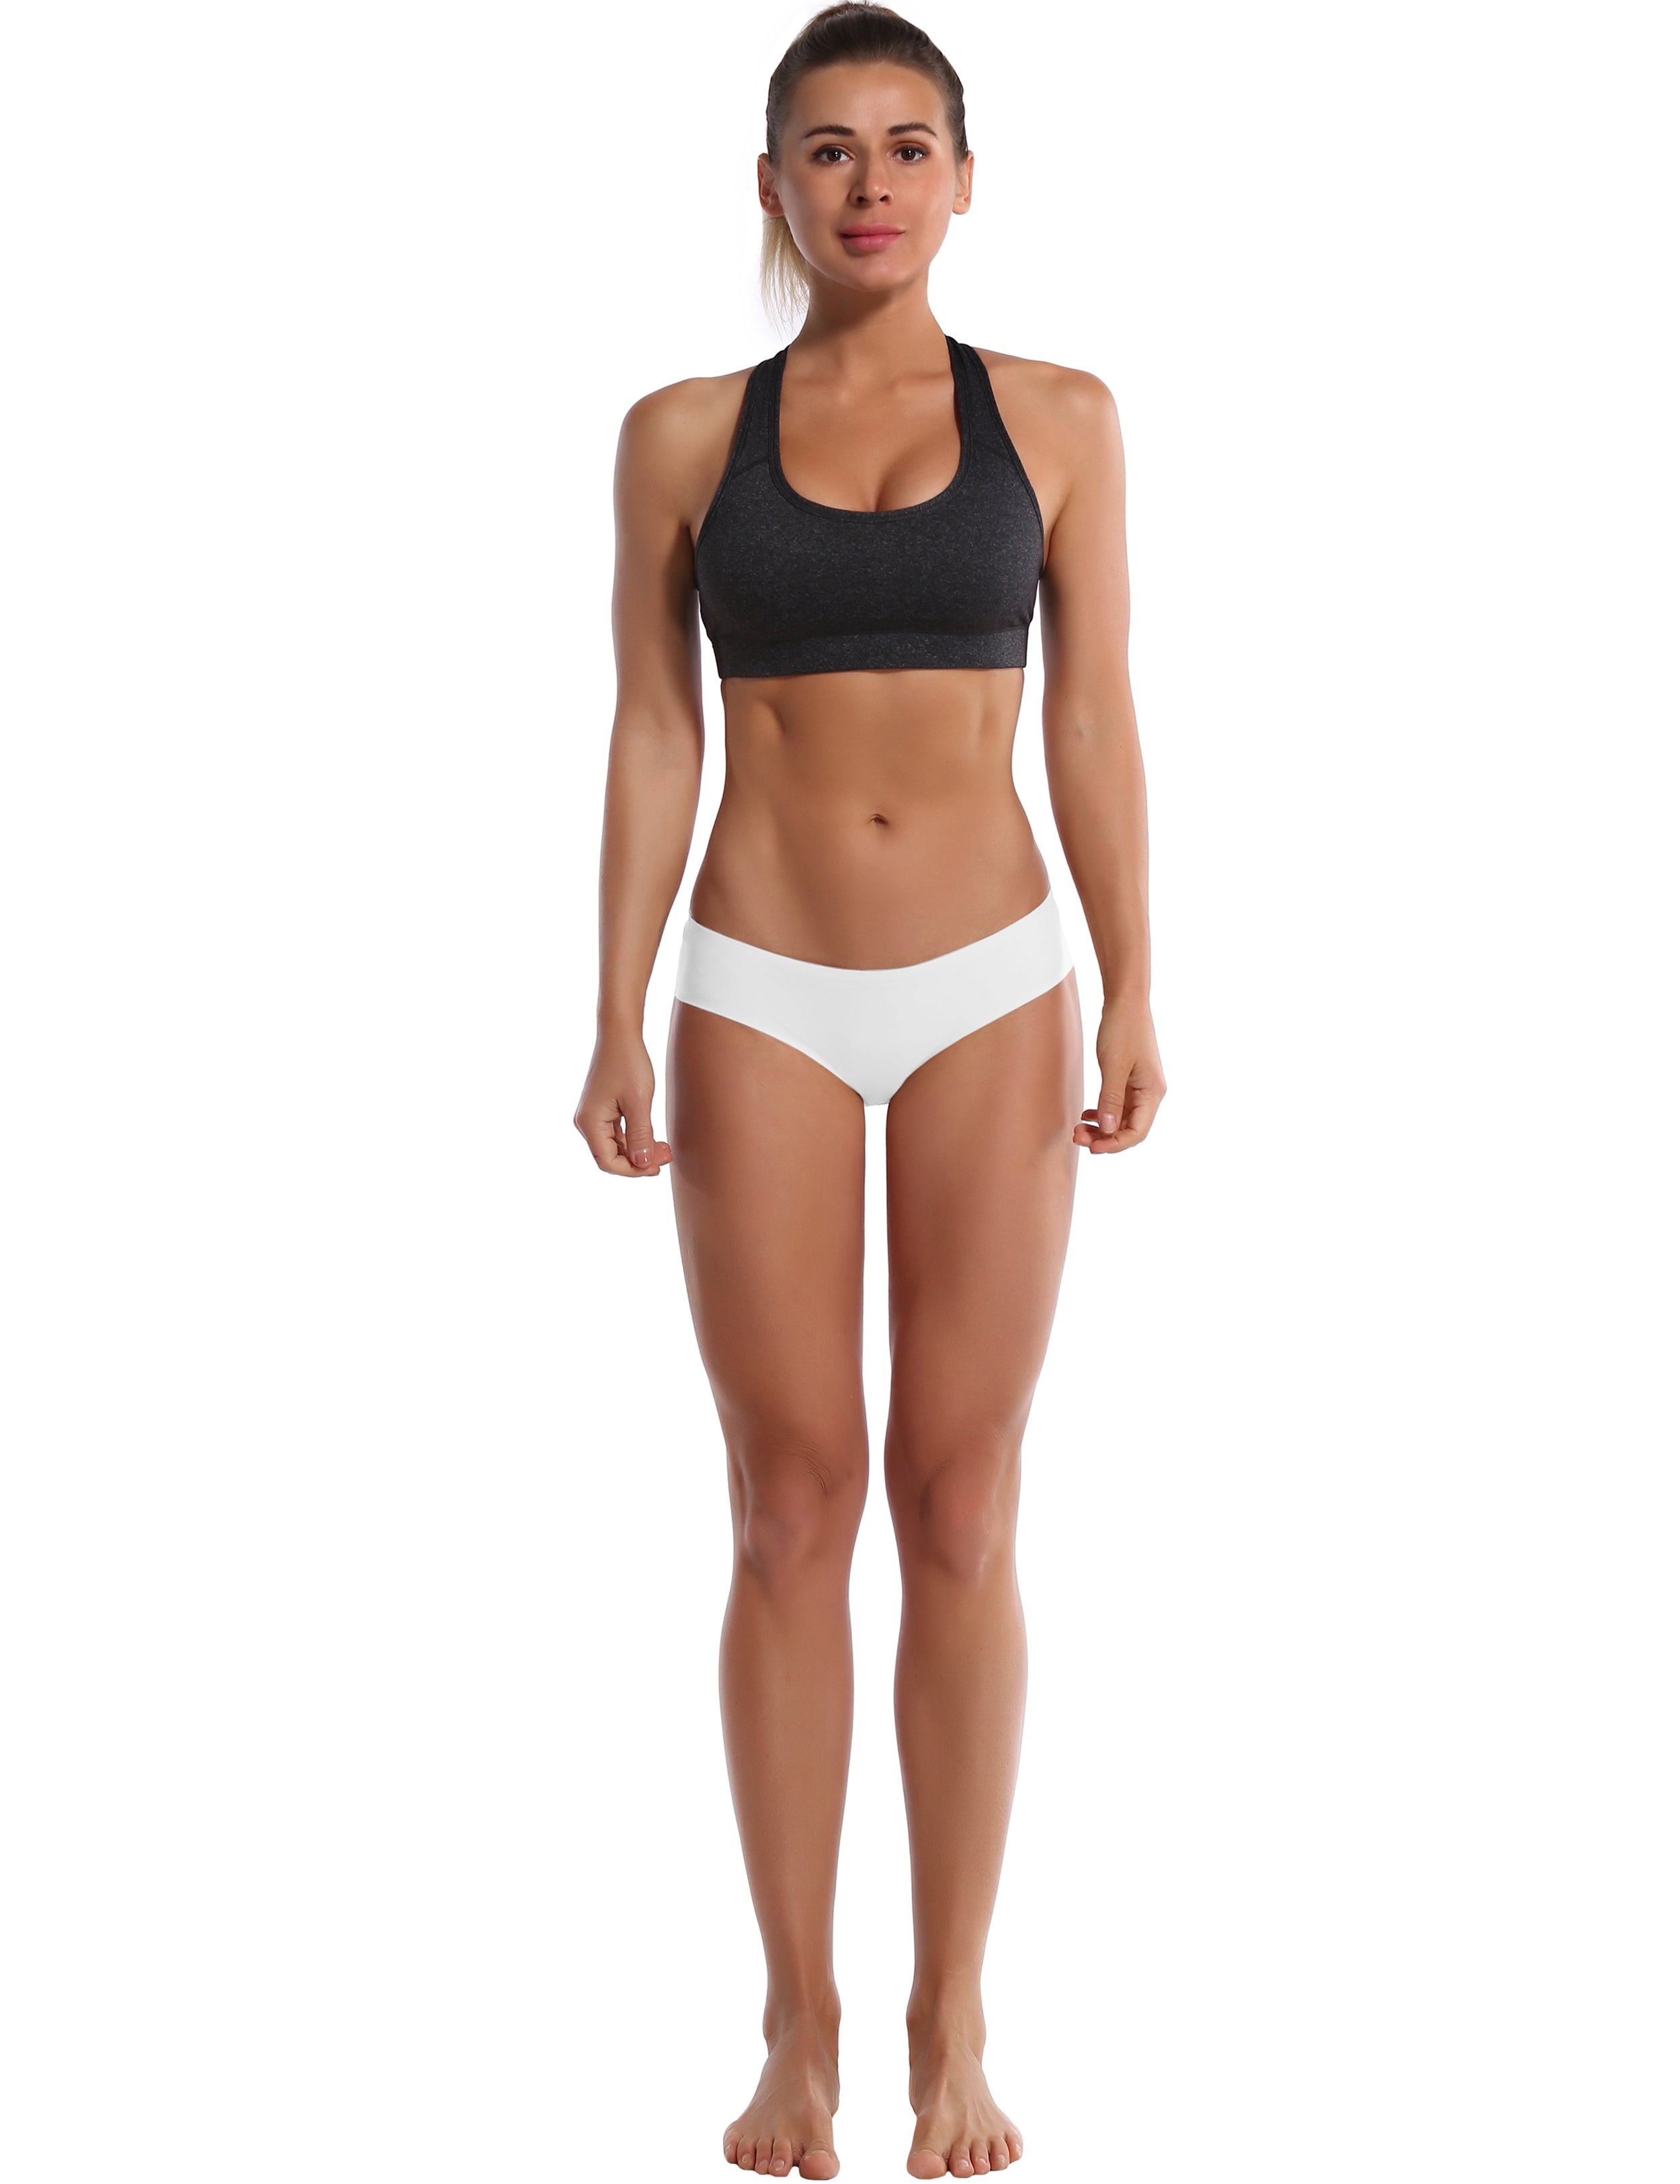 Invisibles Sport Bikini Panties white Sleek, soft, smooth and totally comfortable: our newest bikini style is here. High elasticity High density Softest-ever fabric Laser cutting Unsealed Comfortable No panty lines Machine wash 95% Nylon, 5% Spandex